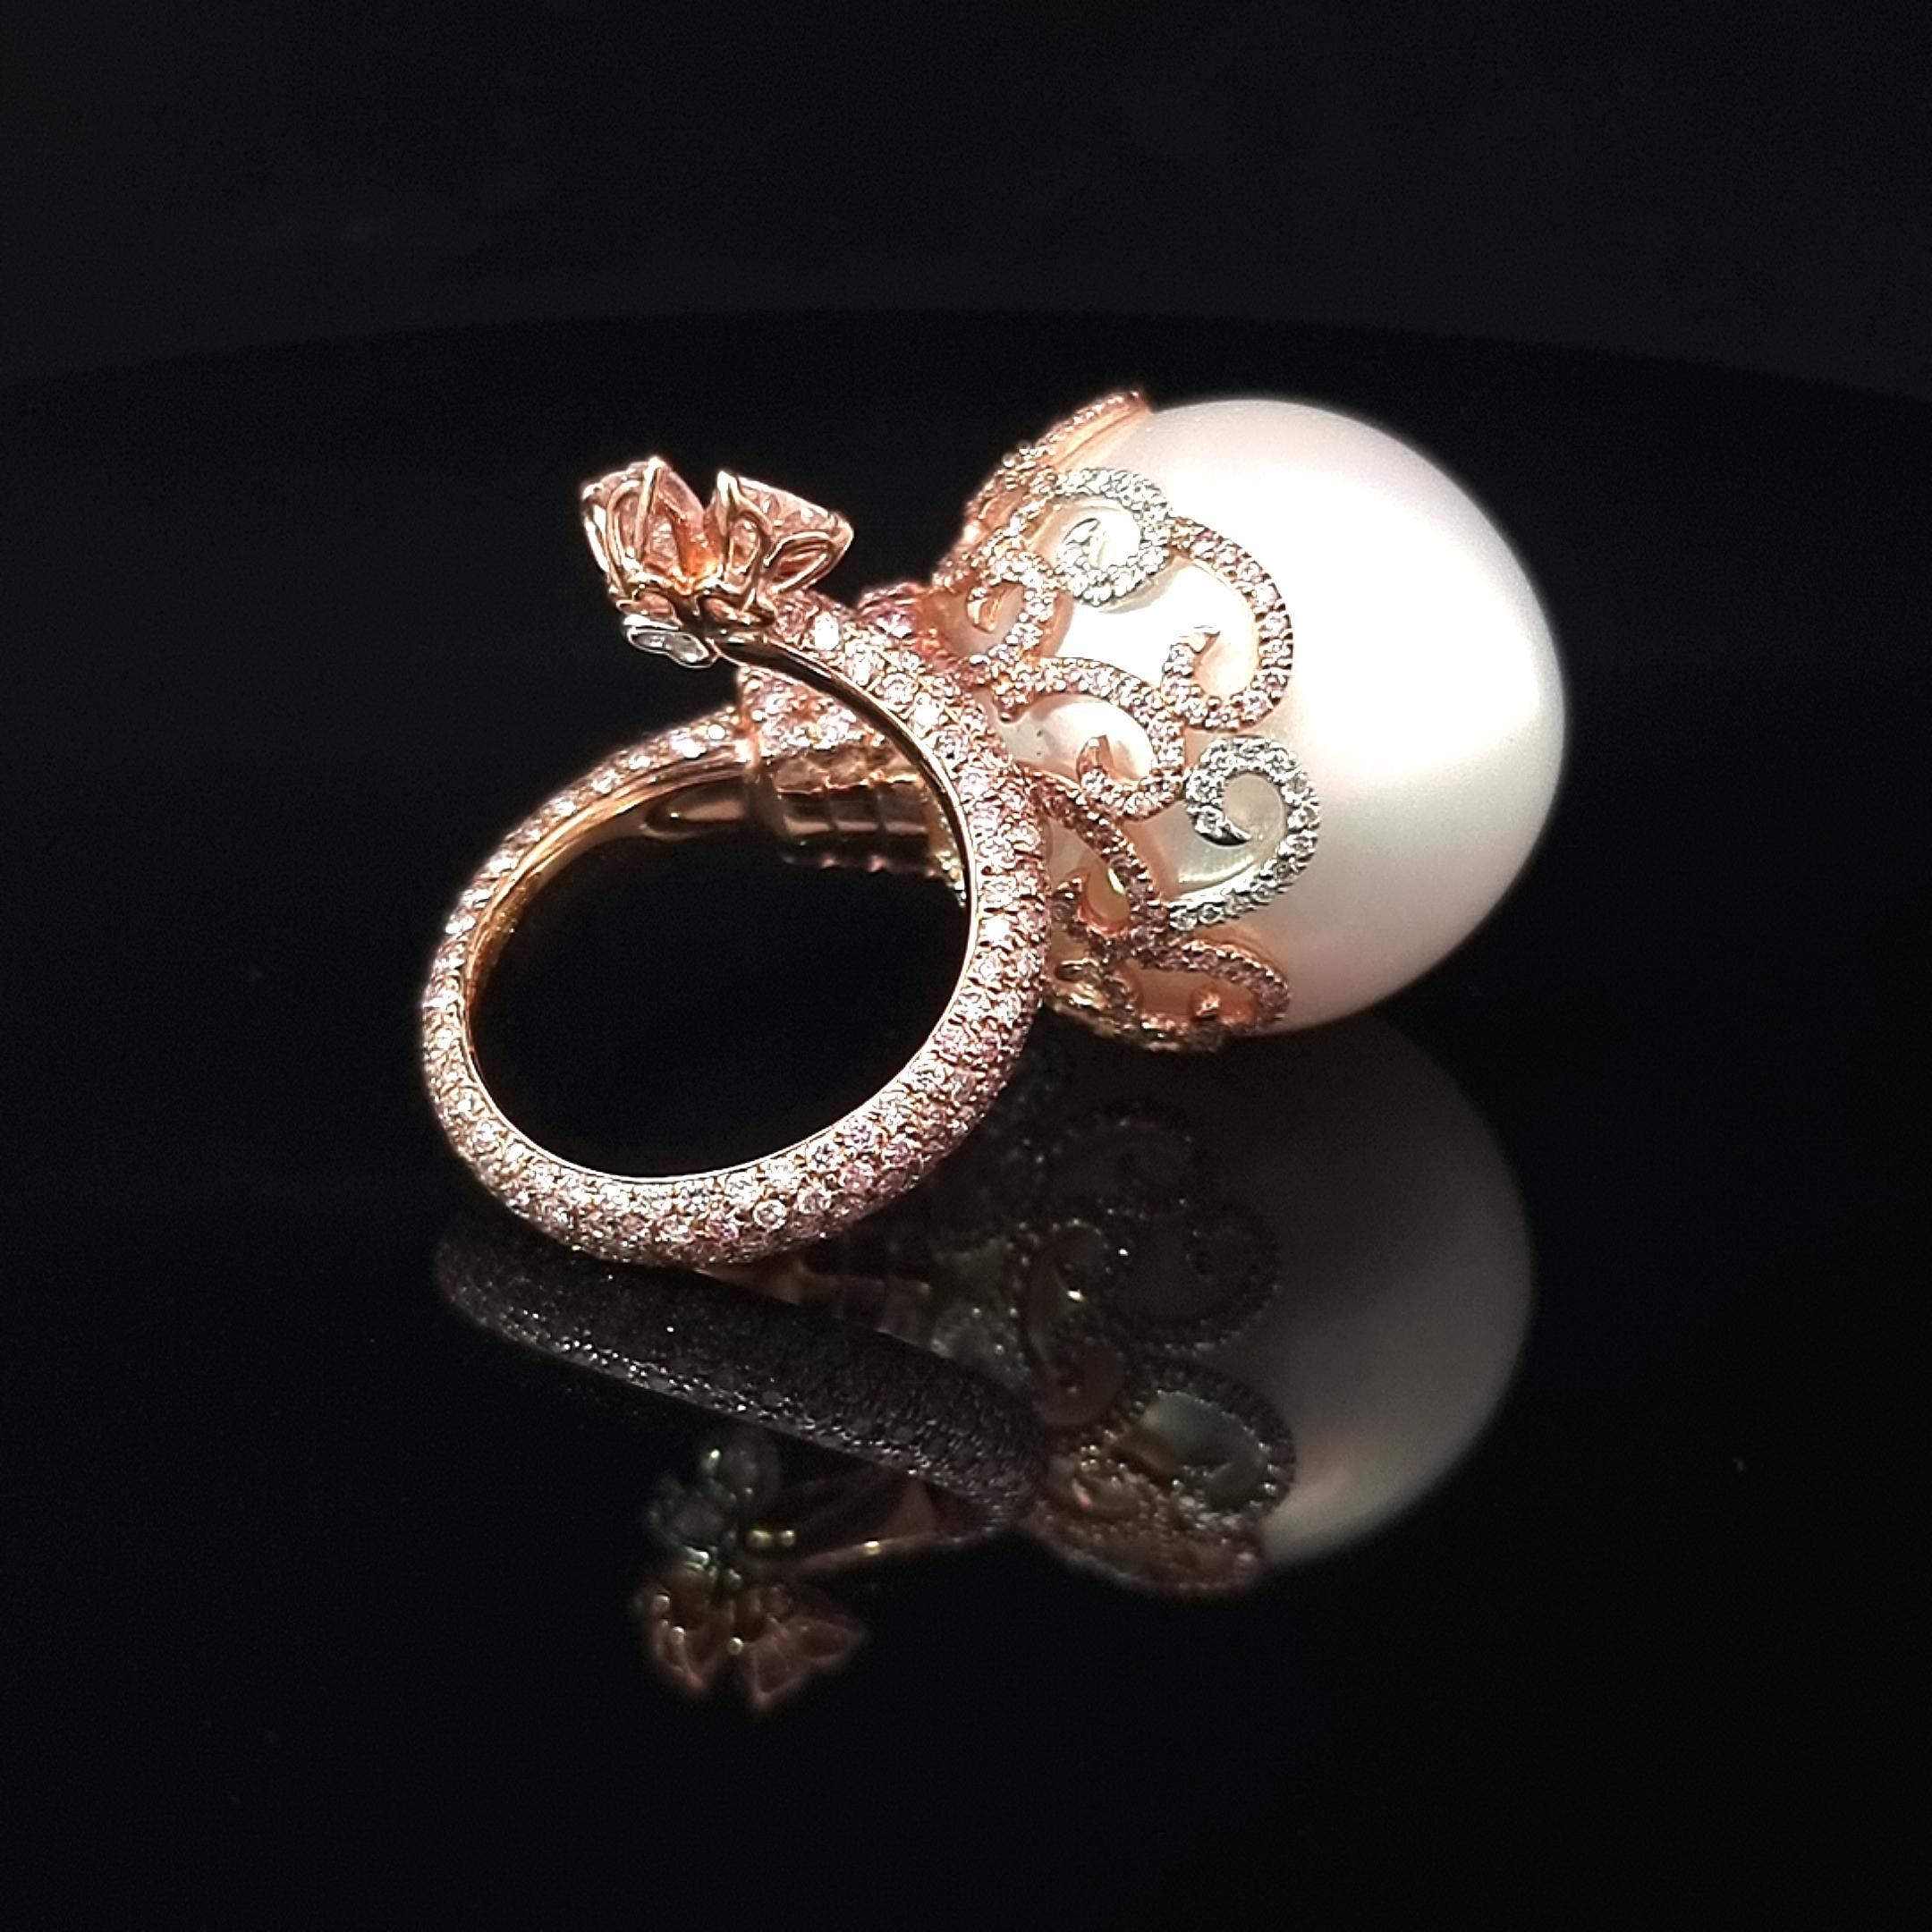 Women's Exclusive and Unique 21 MM GIA Certified Pearl Ring with Diamonds For Sale